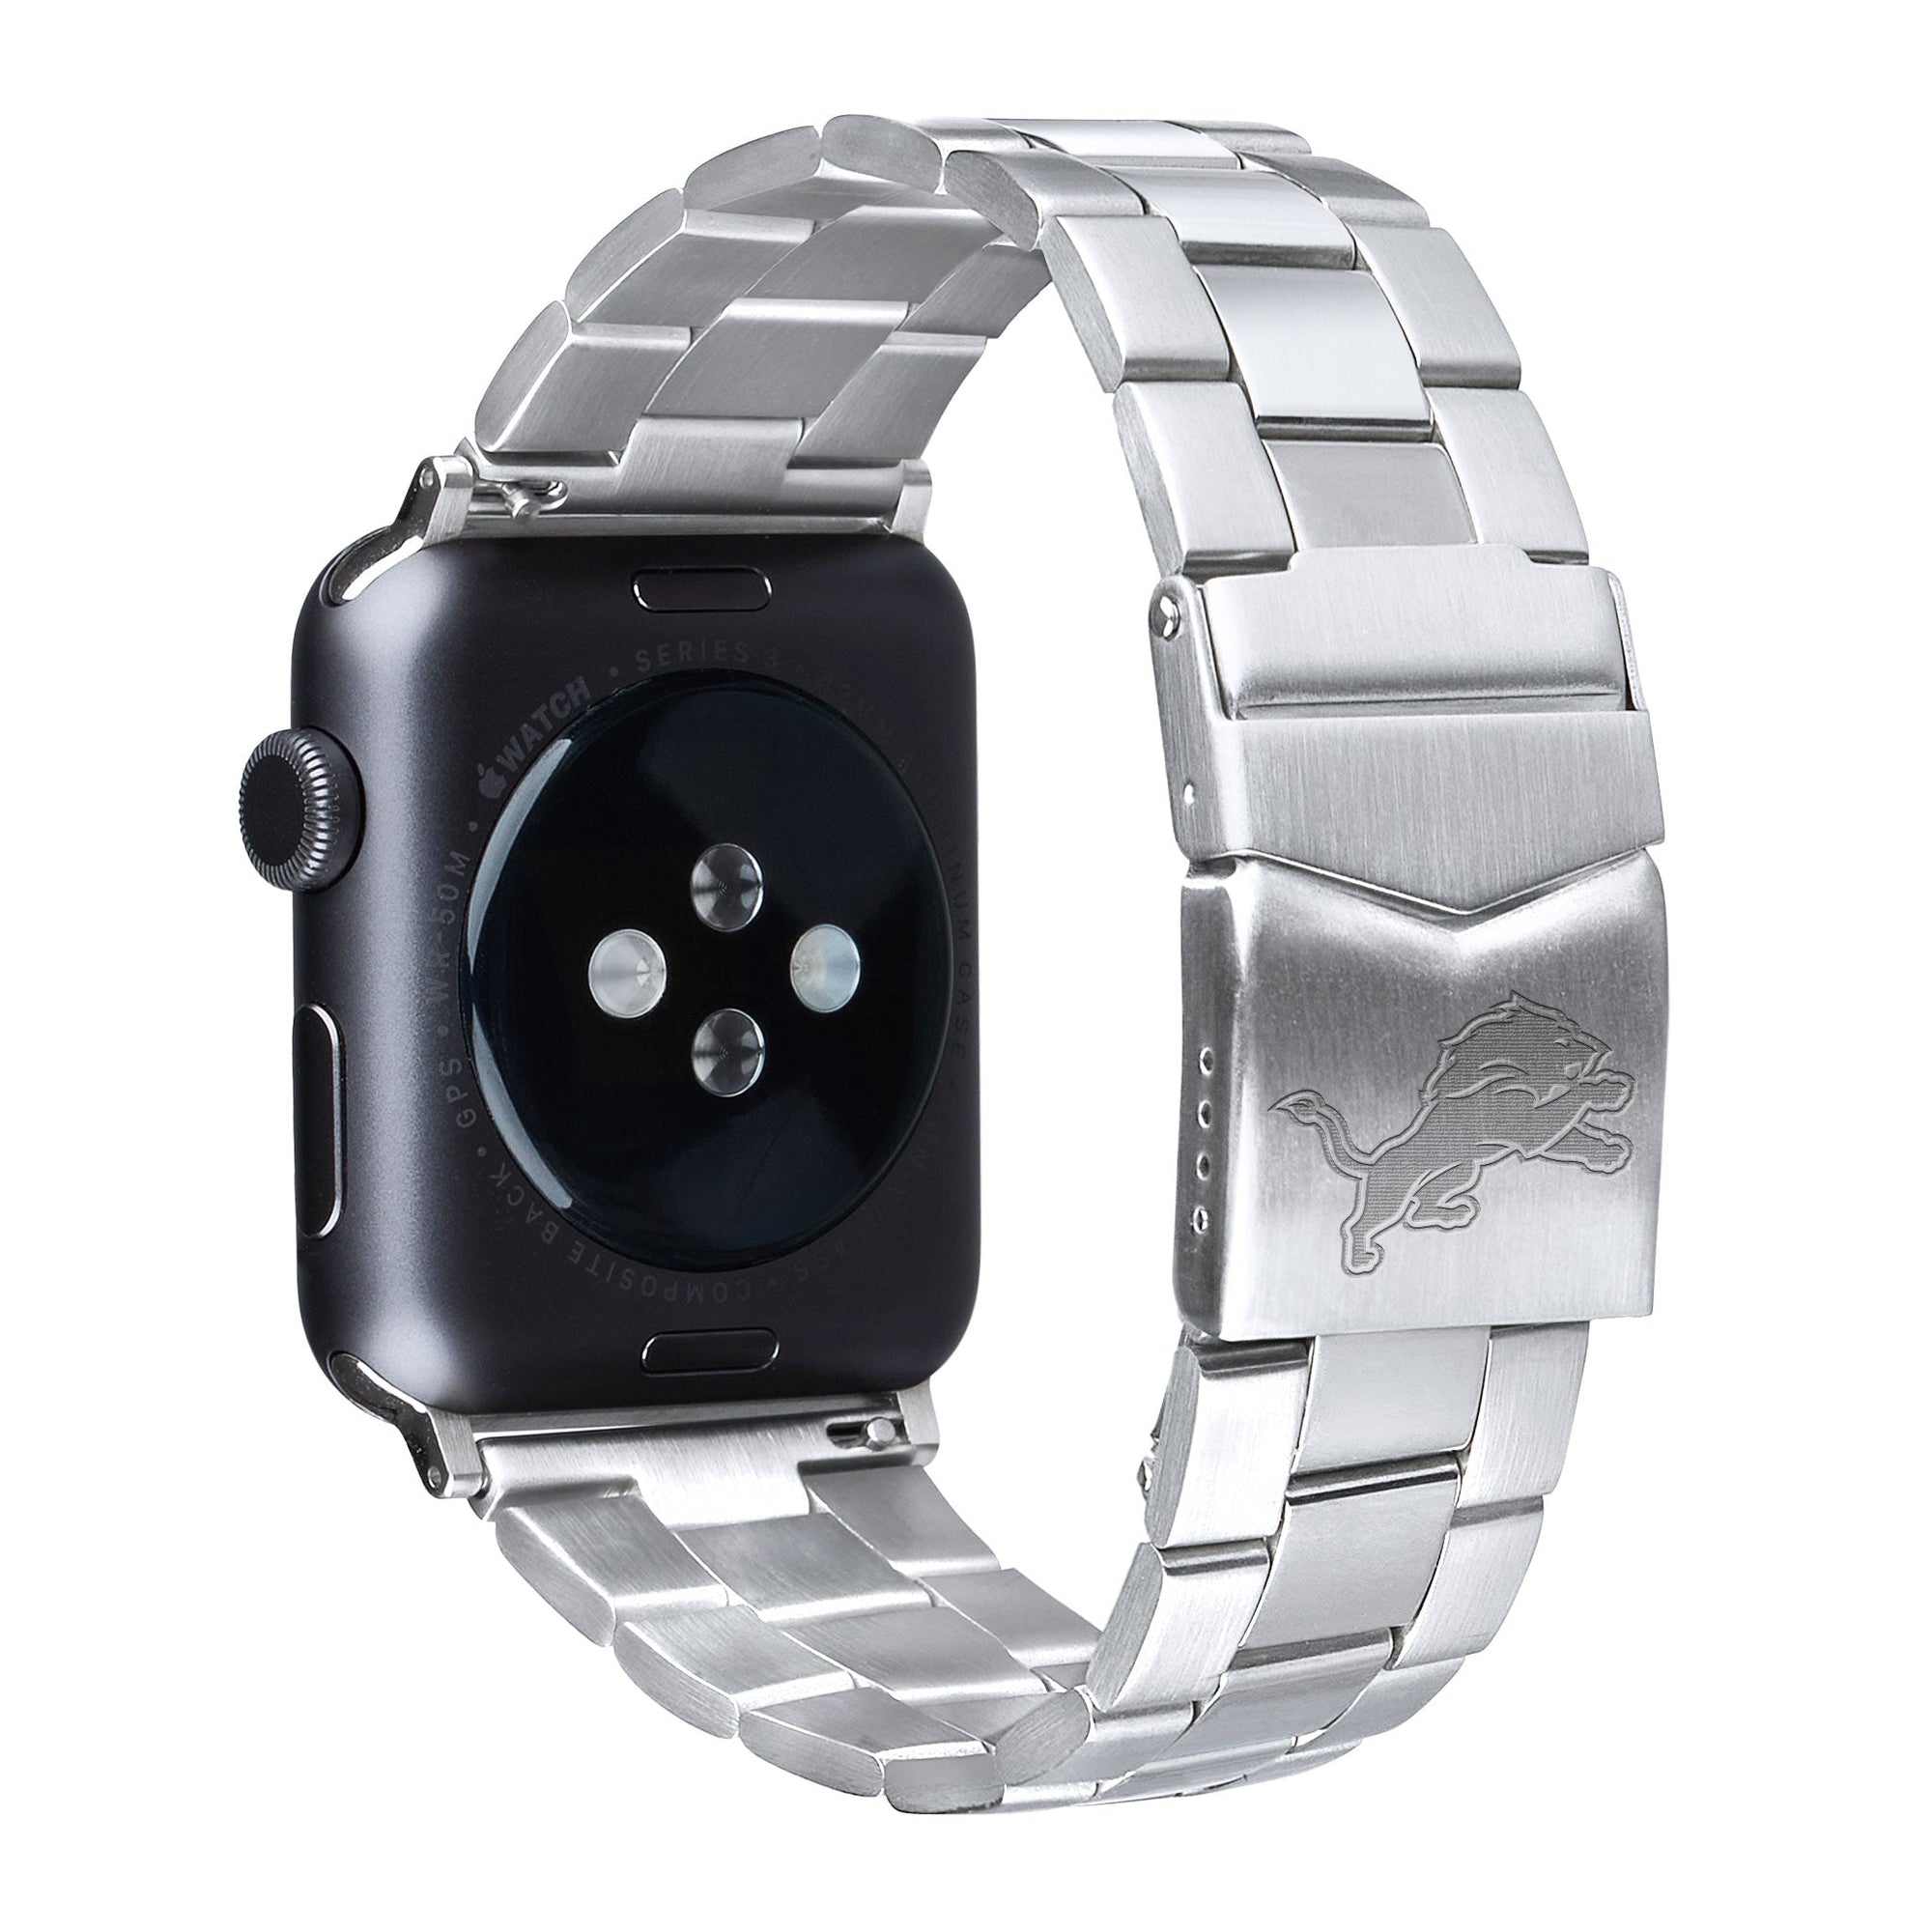 Detroit Loins Stainless Steel Link Style Apple Watch Band - AffinityBands